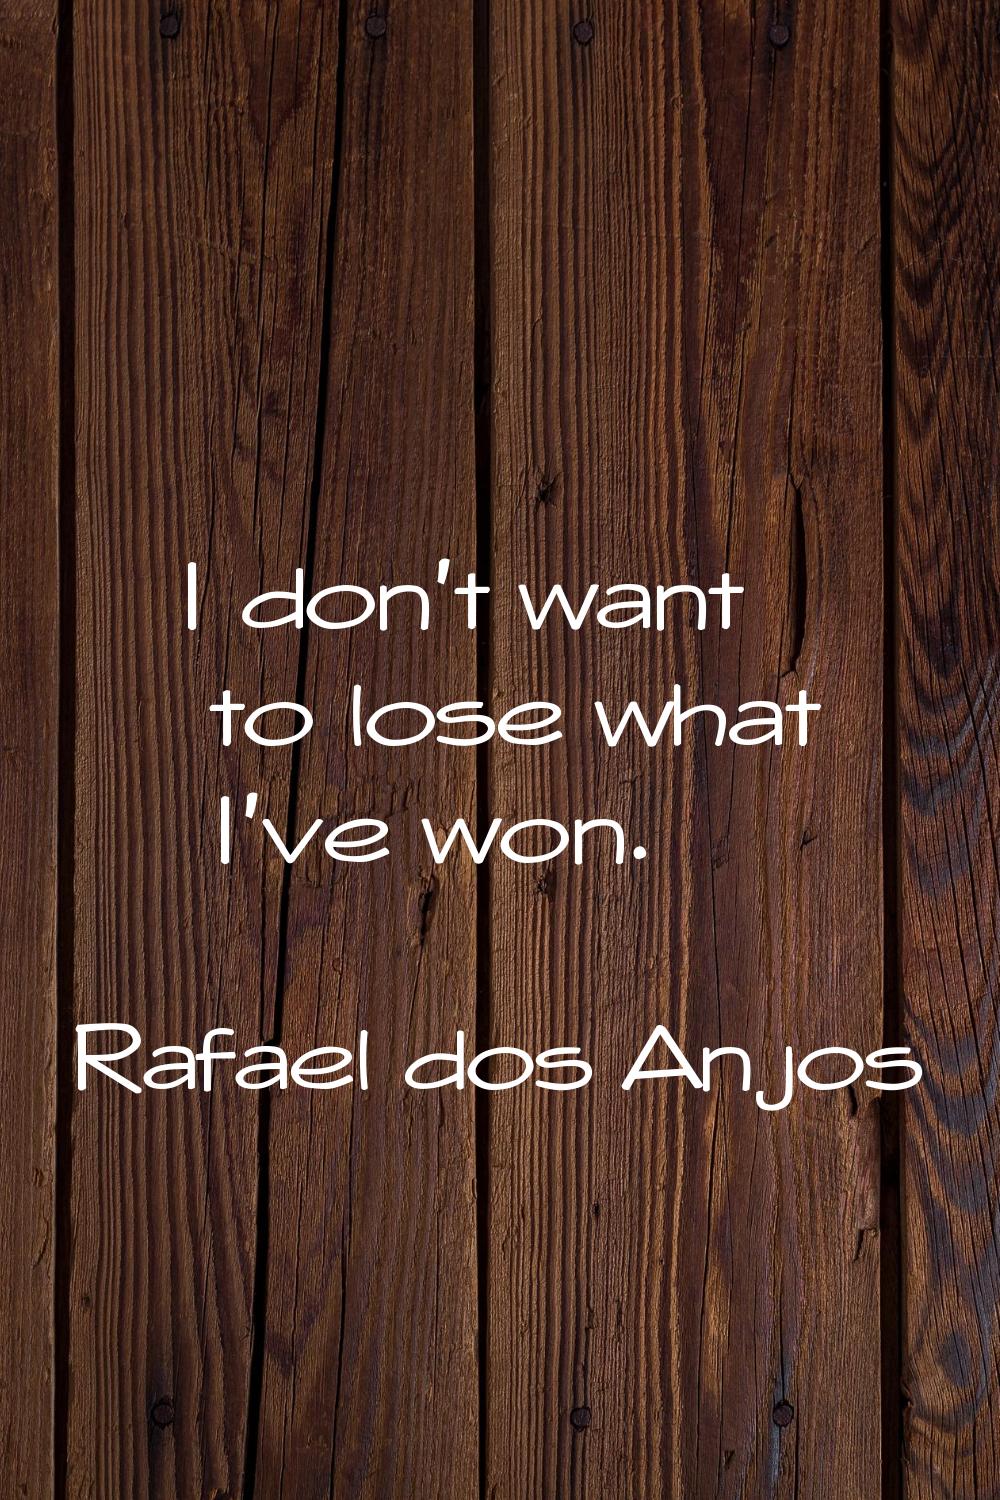 I don't want to lose what I've won.